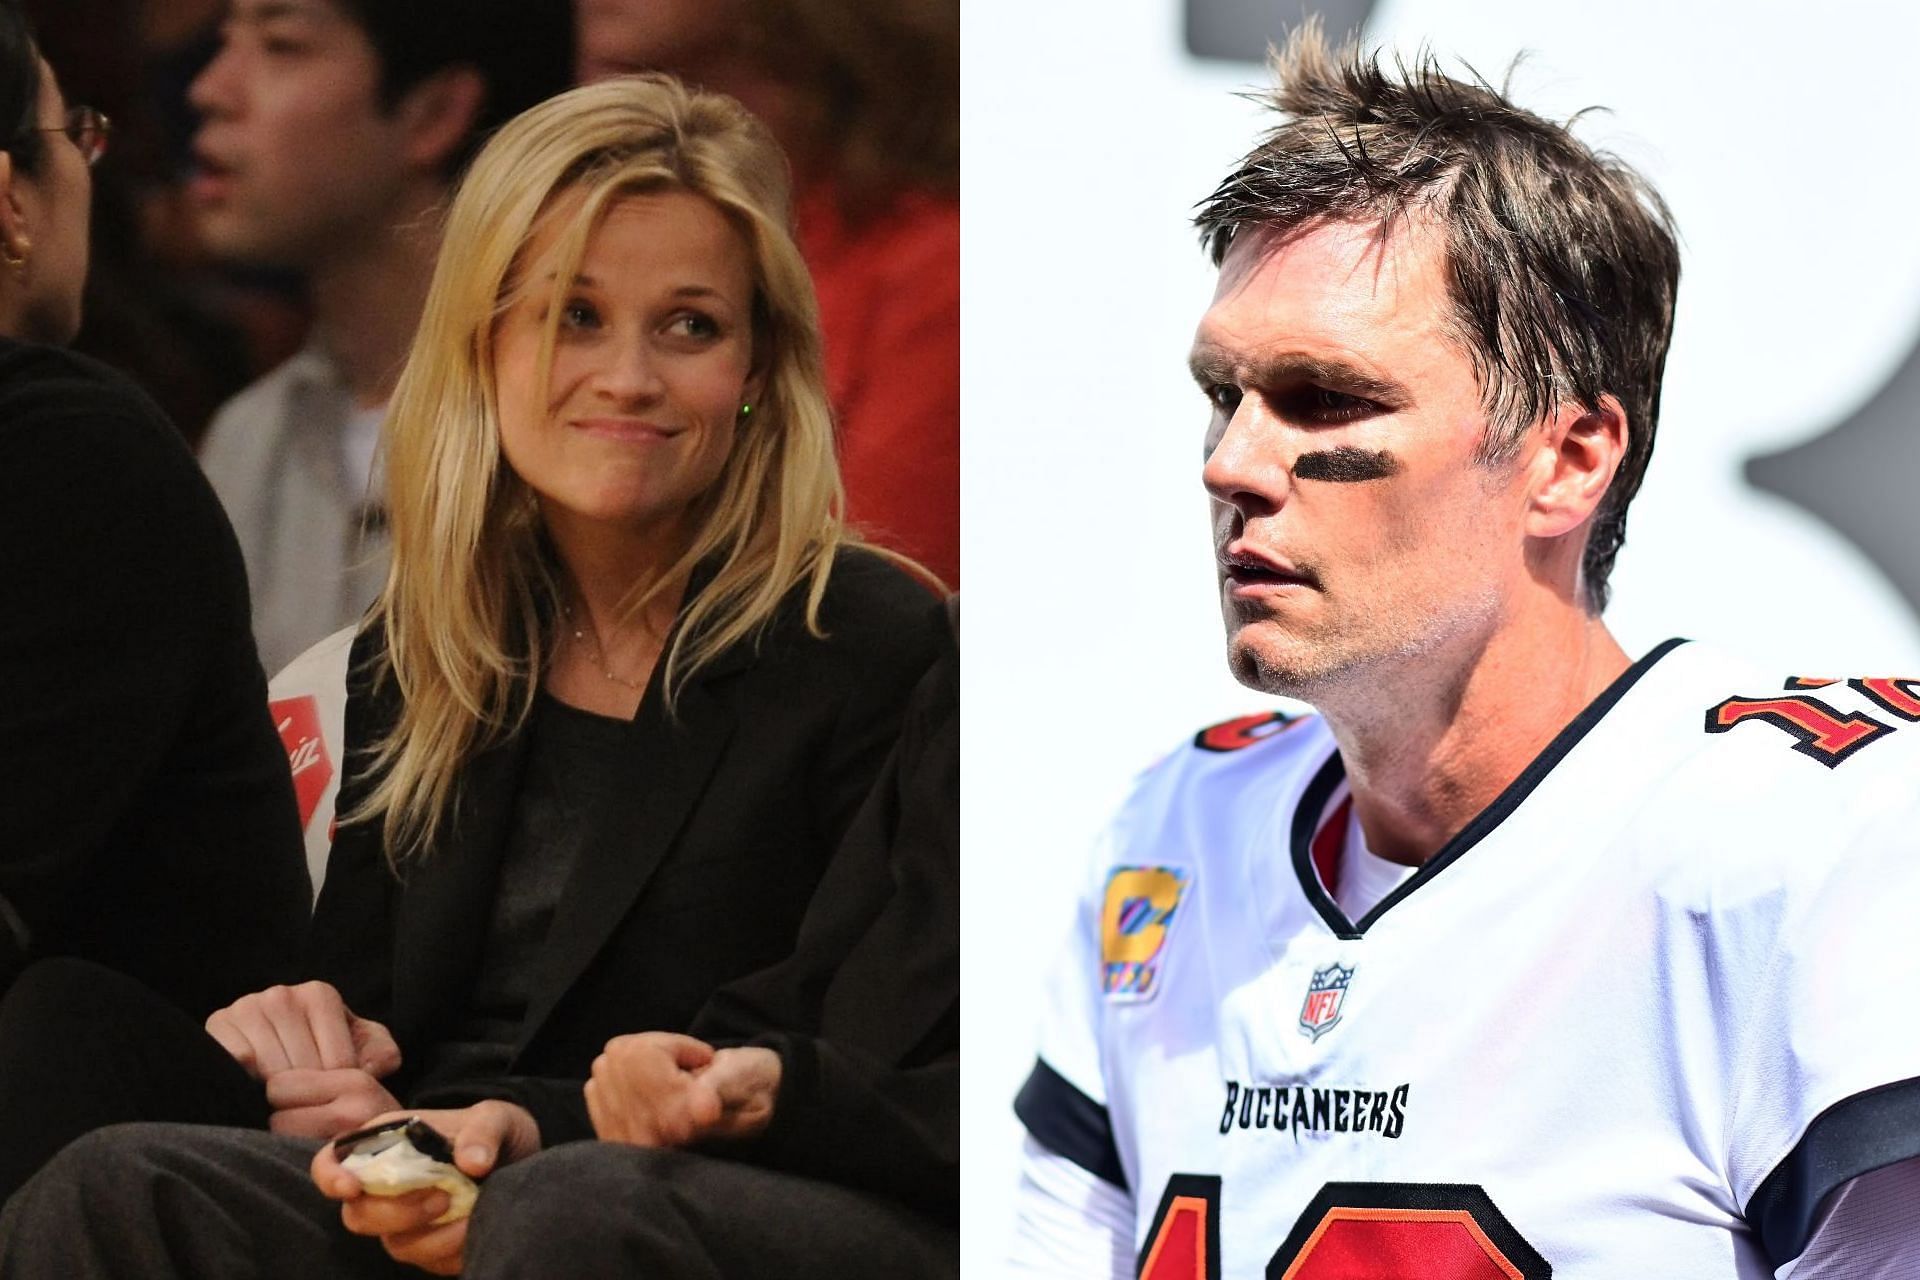 Reese Witherspoon (L) and Tom Brady (R)